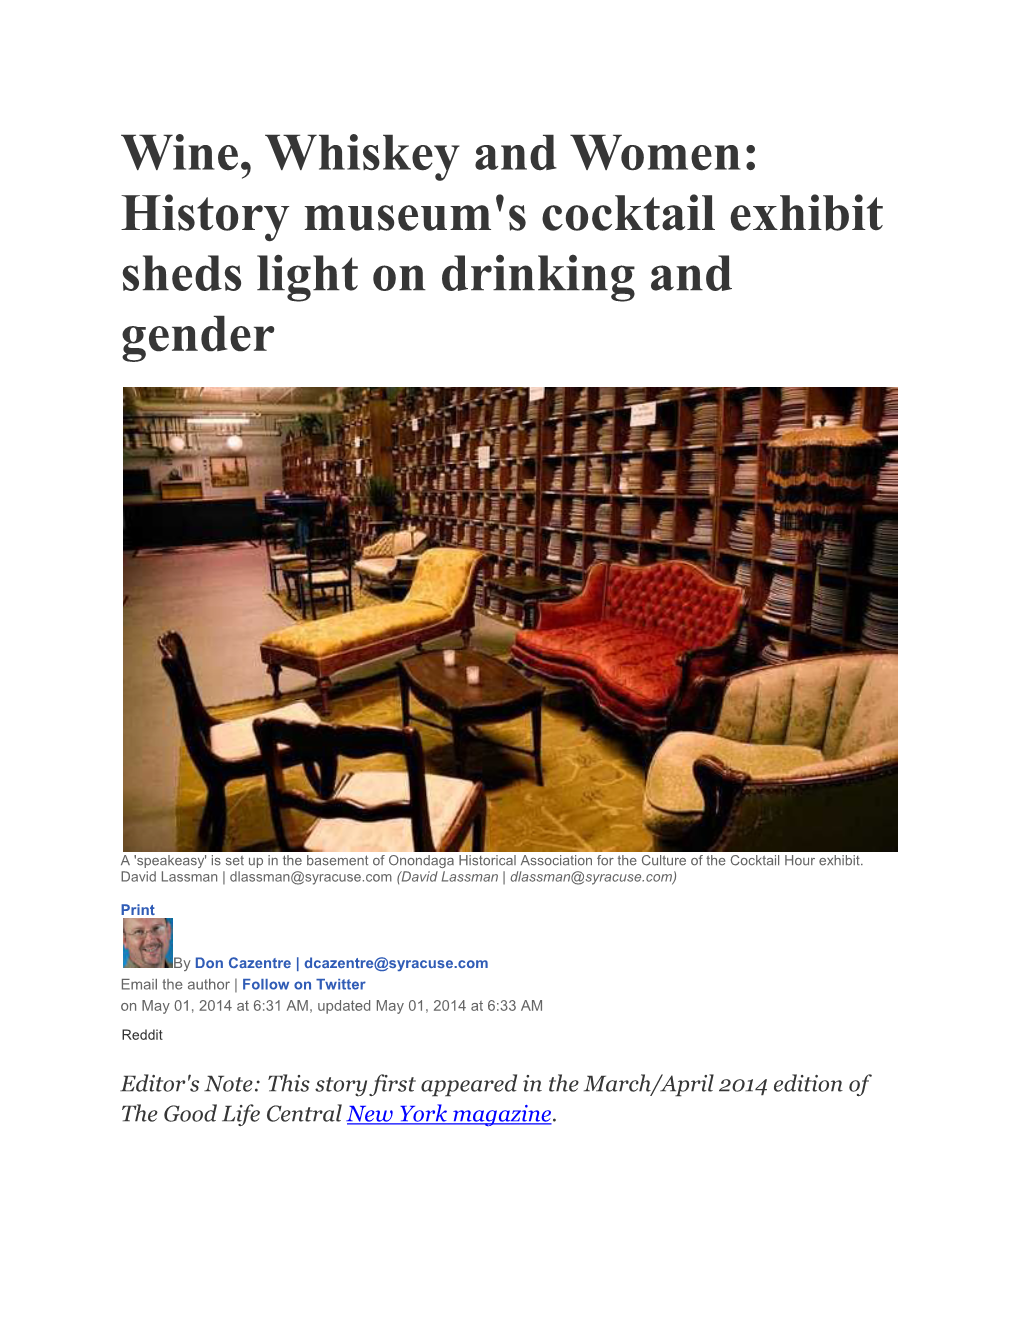 Wine, Whiskey and Women: History Museum's Cocktail Exhibit Sheds Light on Drinking and Gender